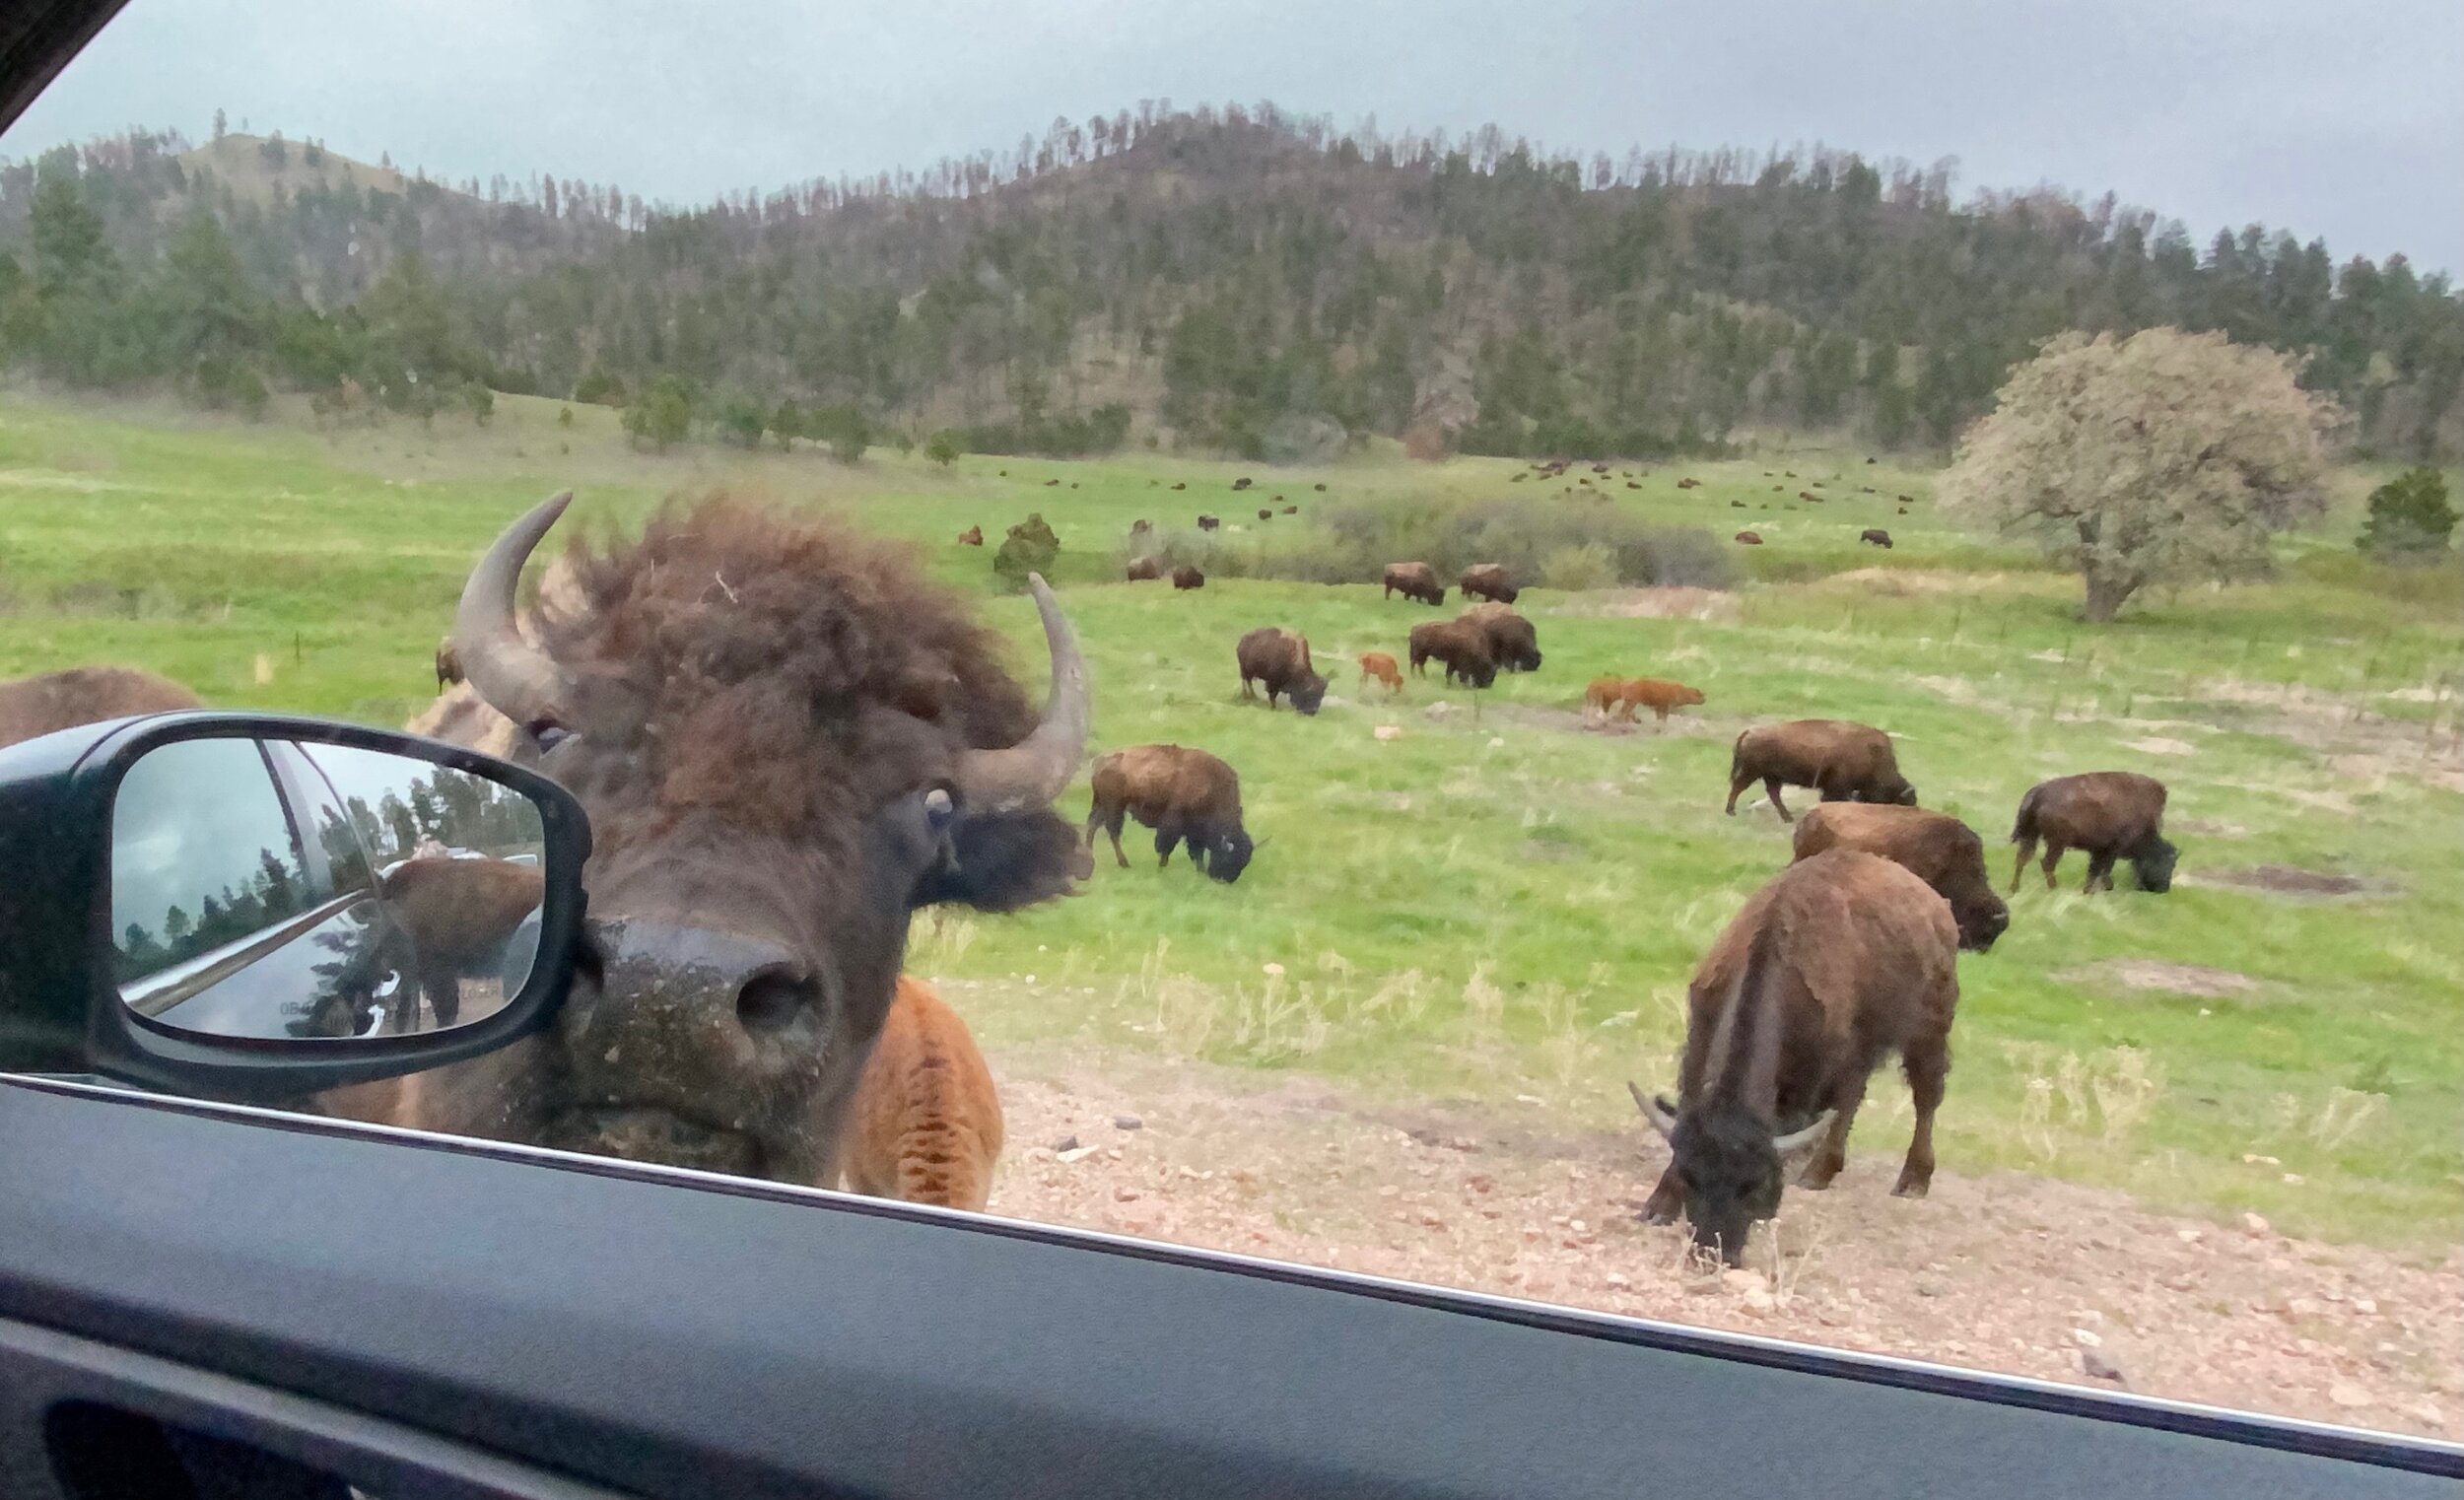 There’s a bison at my window (and we’re gonna need to wipe down that mirror)!  Photo by Karen Boudreaux, May 26, 2021